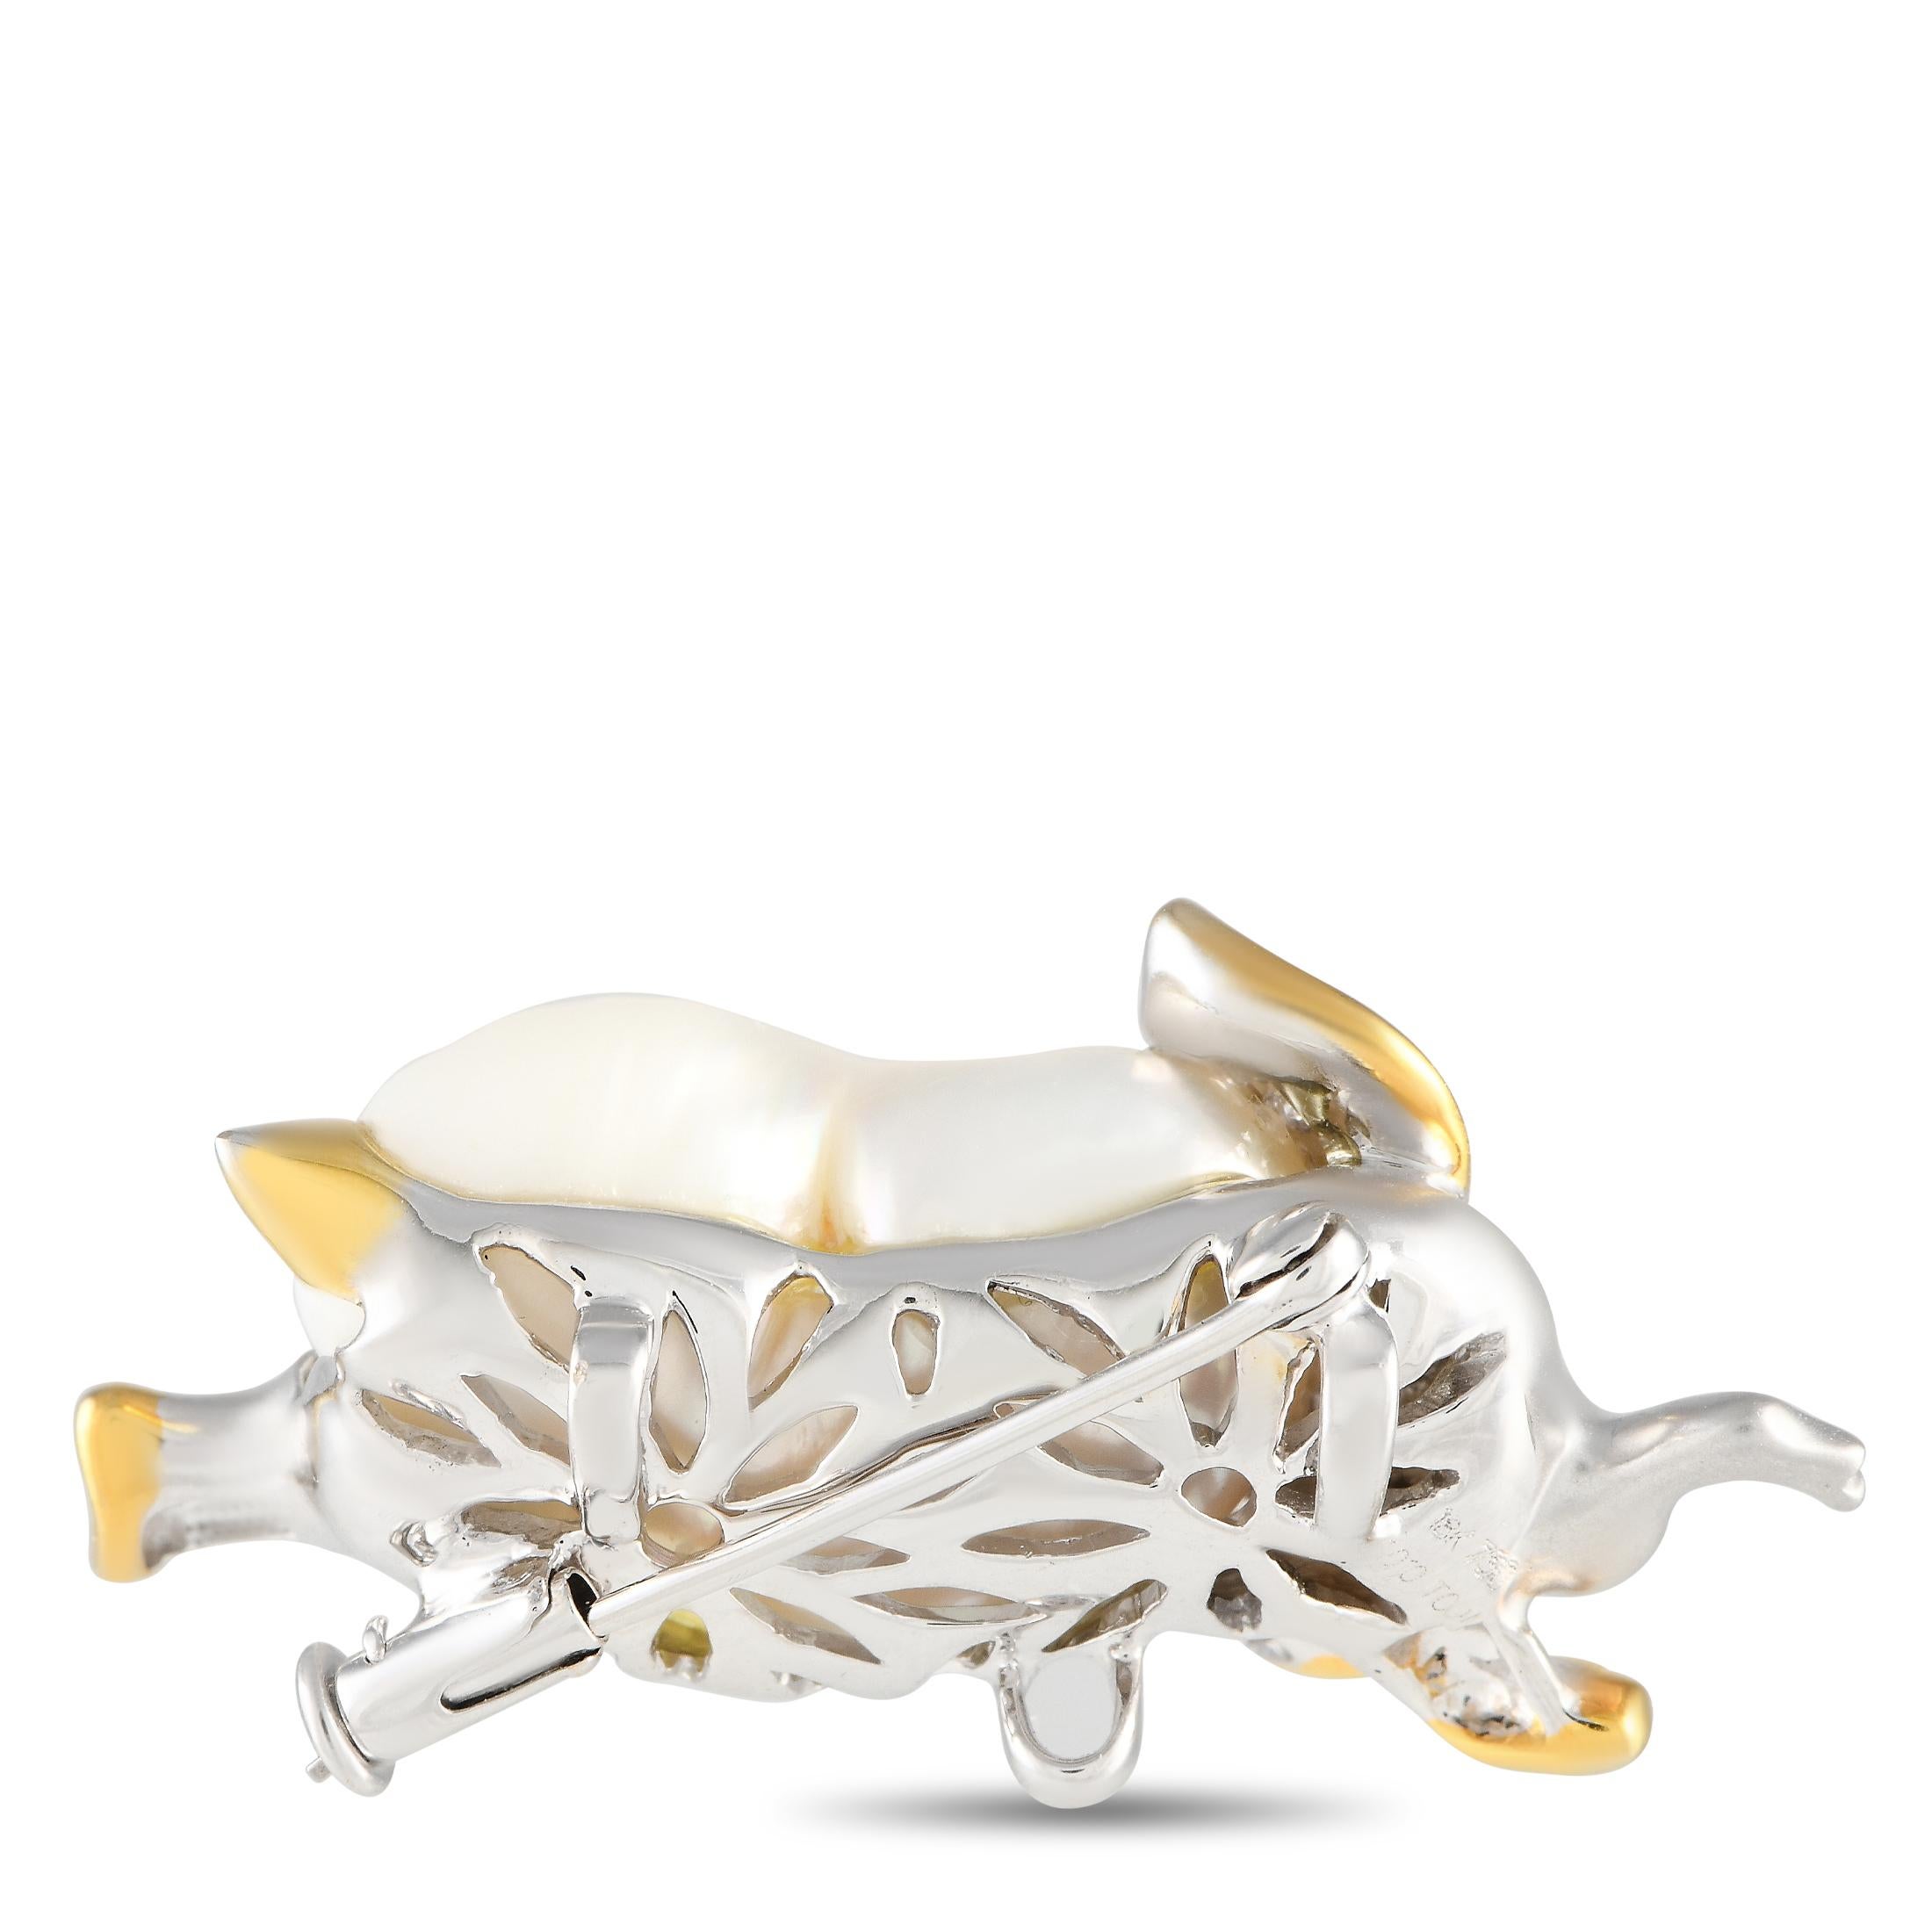 Give your outfits a big style boost with this little addition. This 2-in-1 LB Exclusive piece can be worn as a pendant or as a brooch. It features a sculpted elephant in 18K white gold, with 18K yellow gold details on its eyes, ears, tail, and feet.